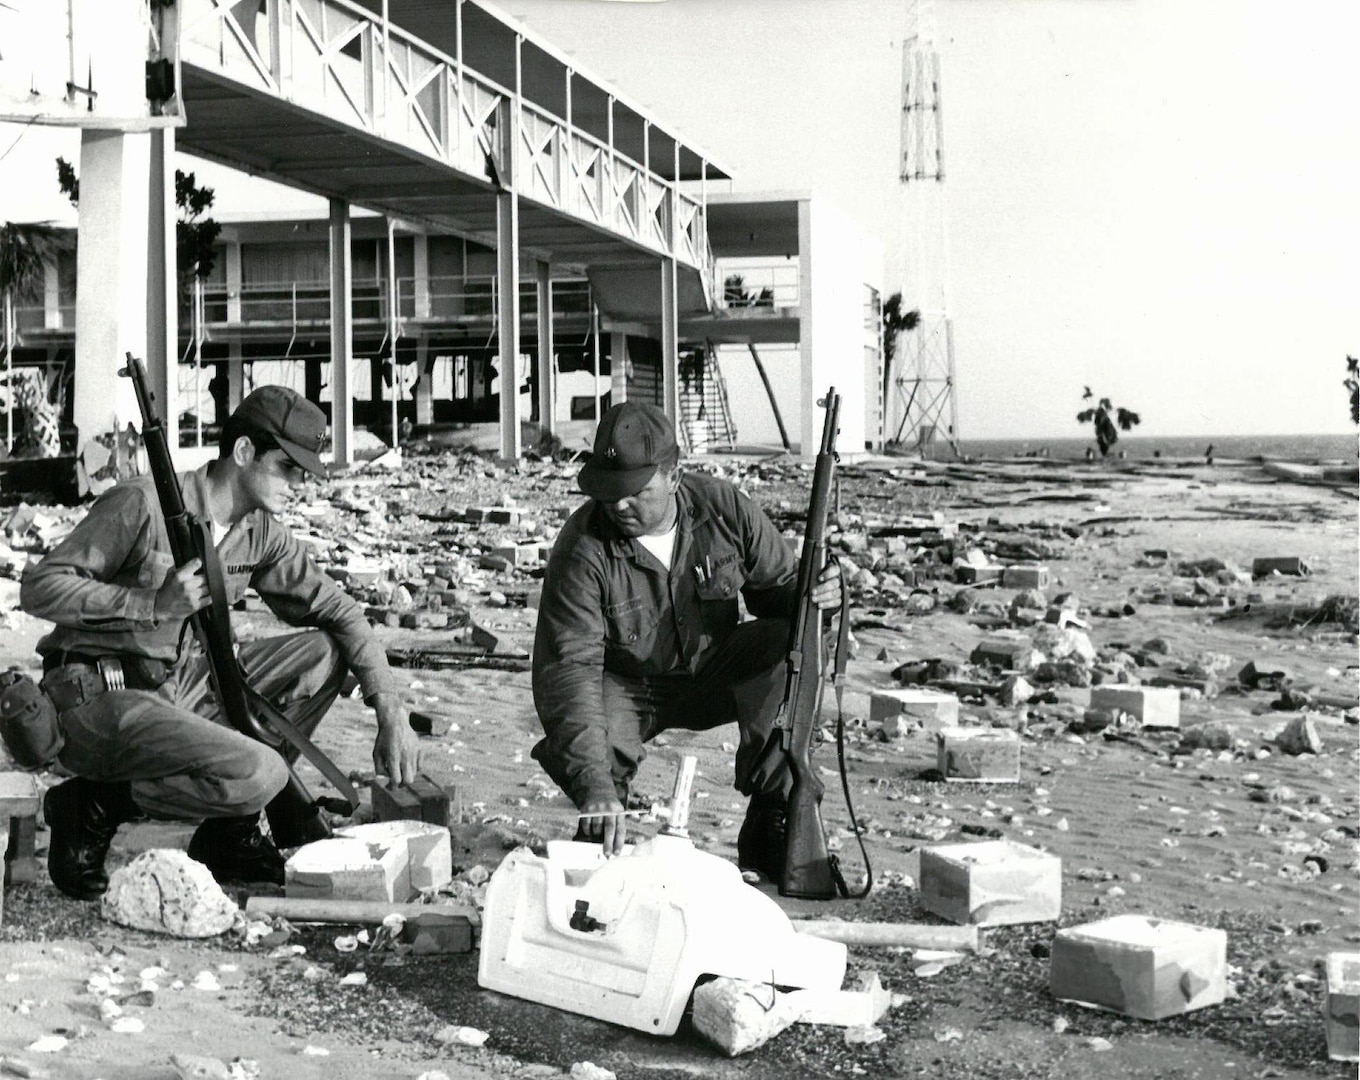 Amid the rubble at Biloxi on Aug. 18, 1969, were Spc. 4 Robert Vaughn and  Sgt. 1st Class Rodney Ferguson, 135th Transportation Company (Amphibious), Mississippi Army  National Guard, based at Ocean Springs, Mississippi.  Photo courtesy of National Guard Educational Foundation.